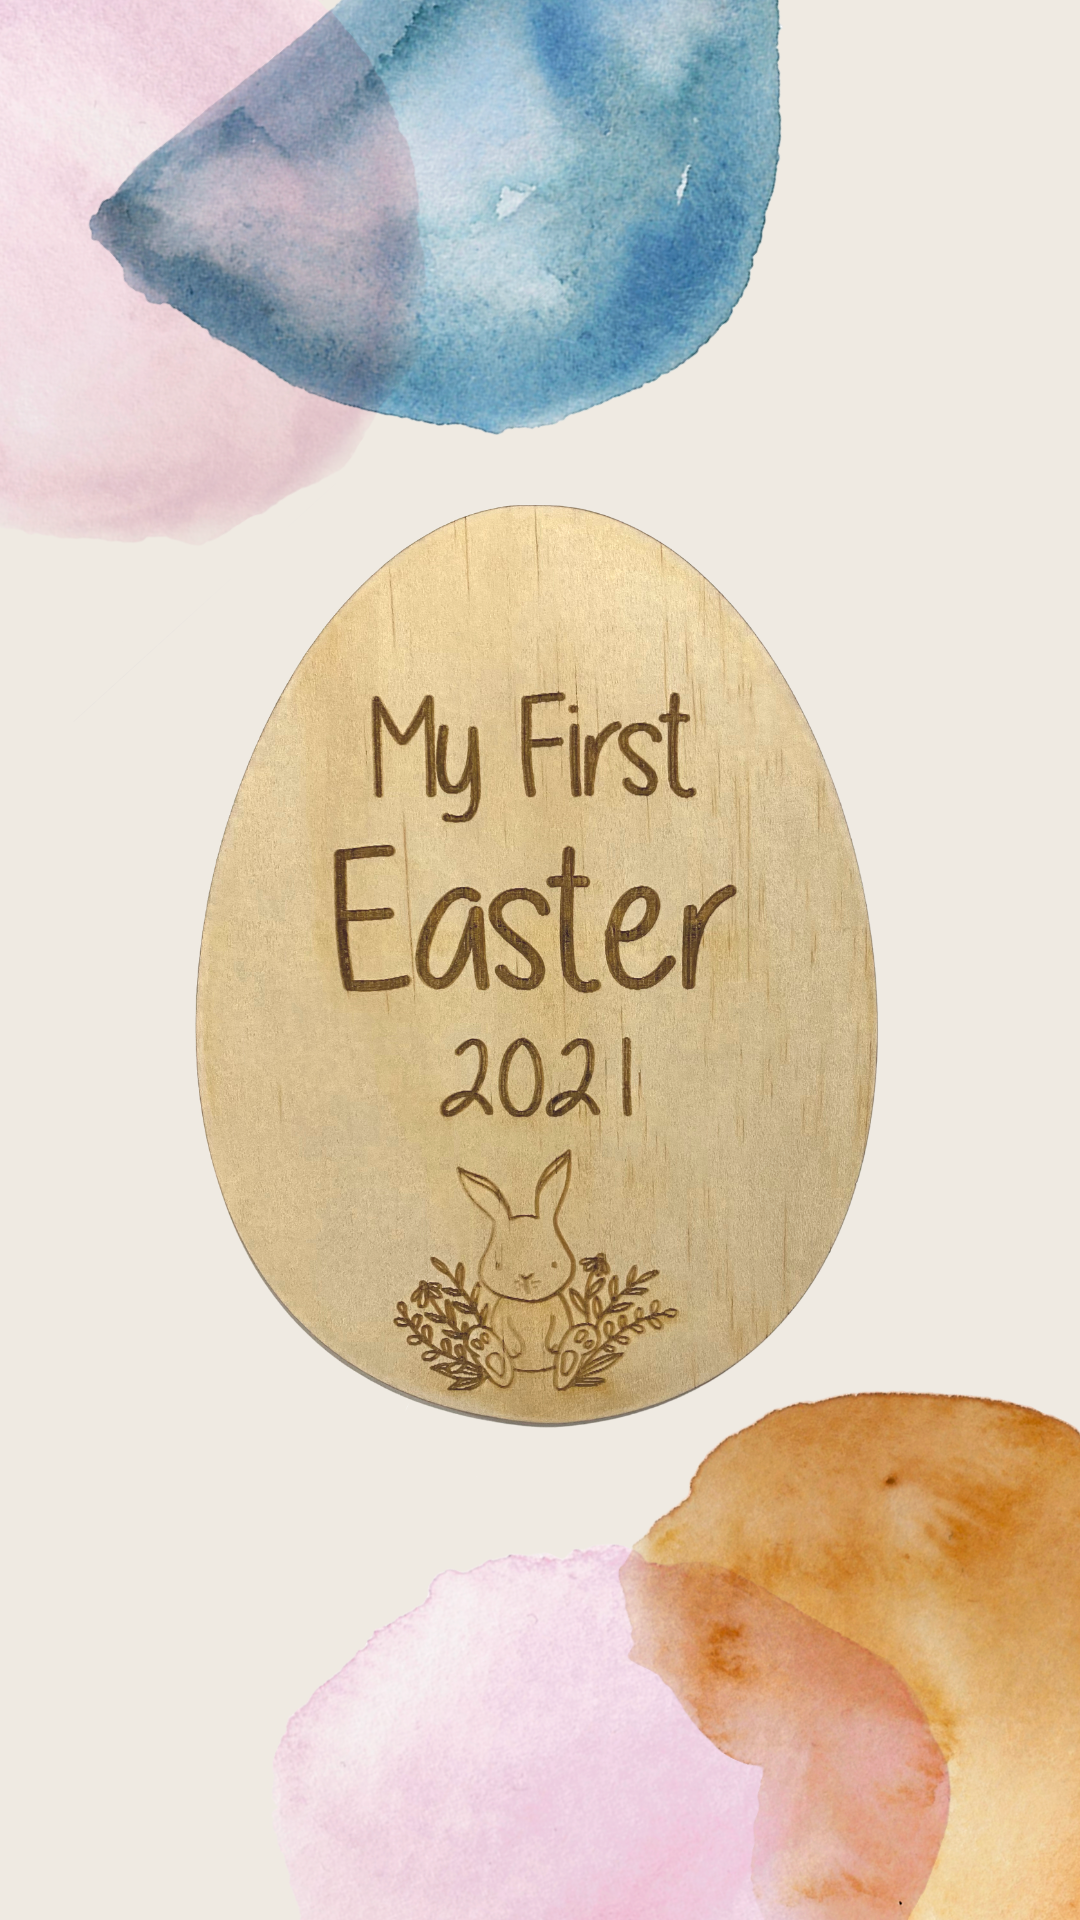 My first Easter 2021